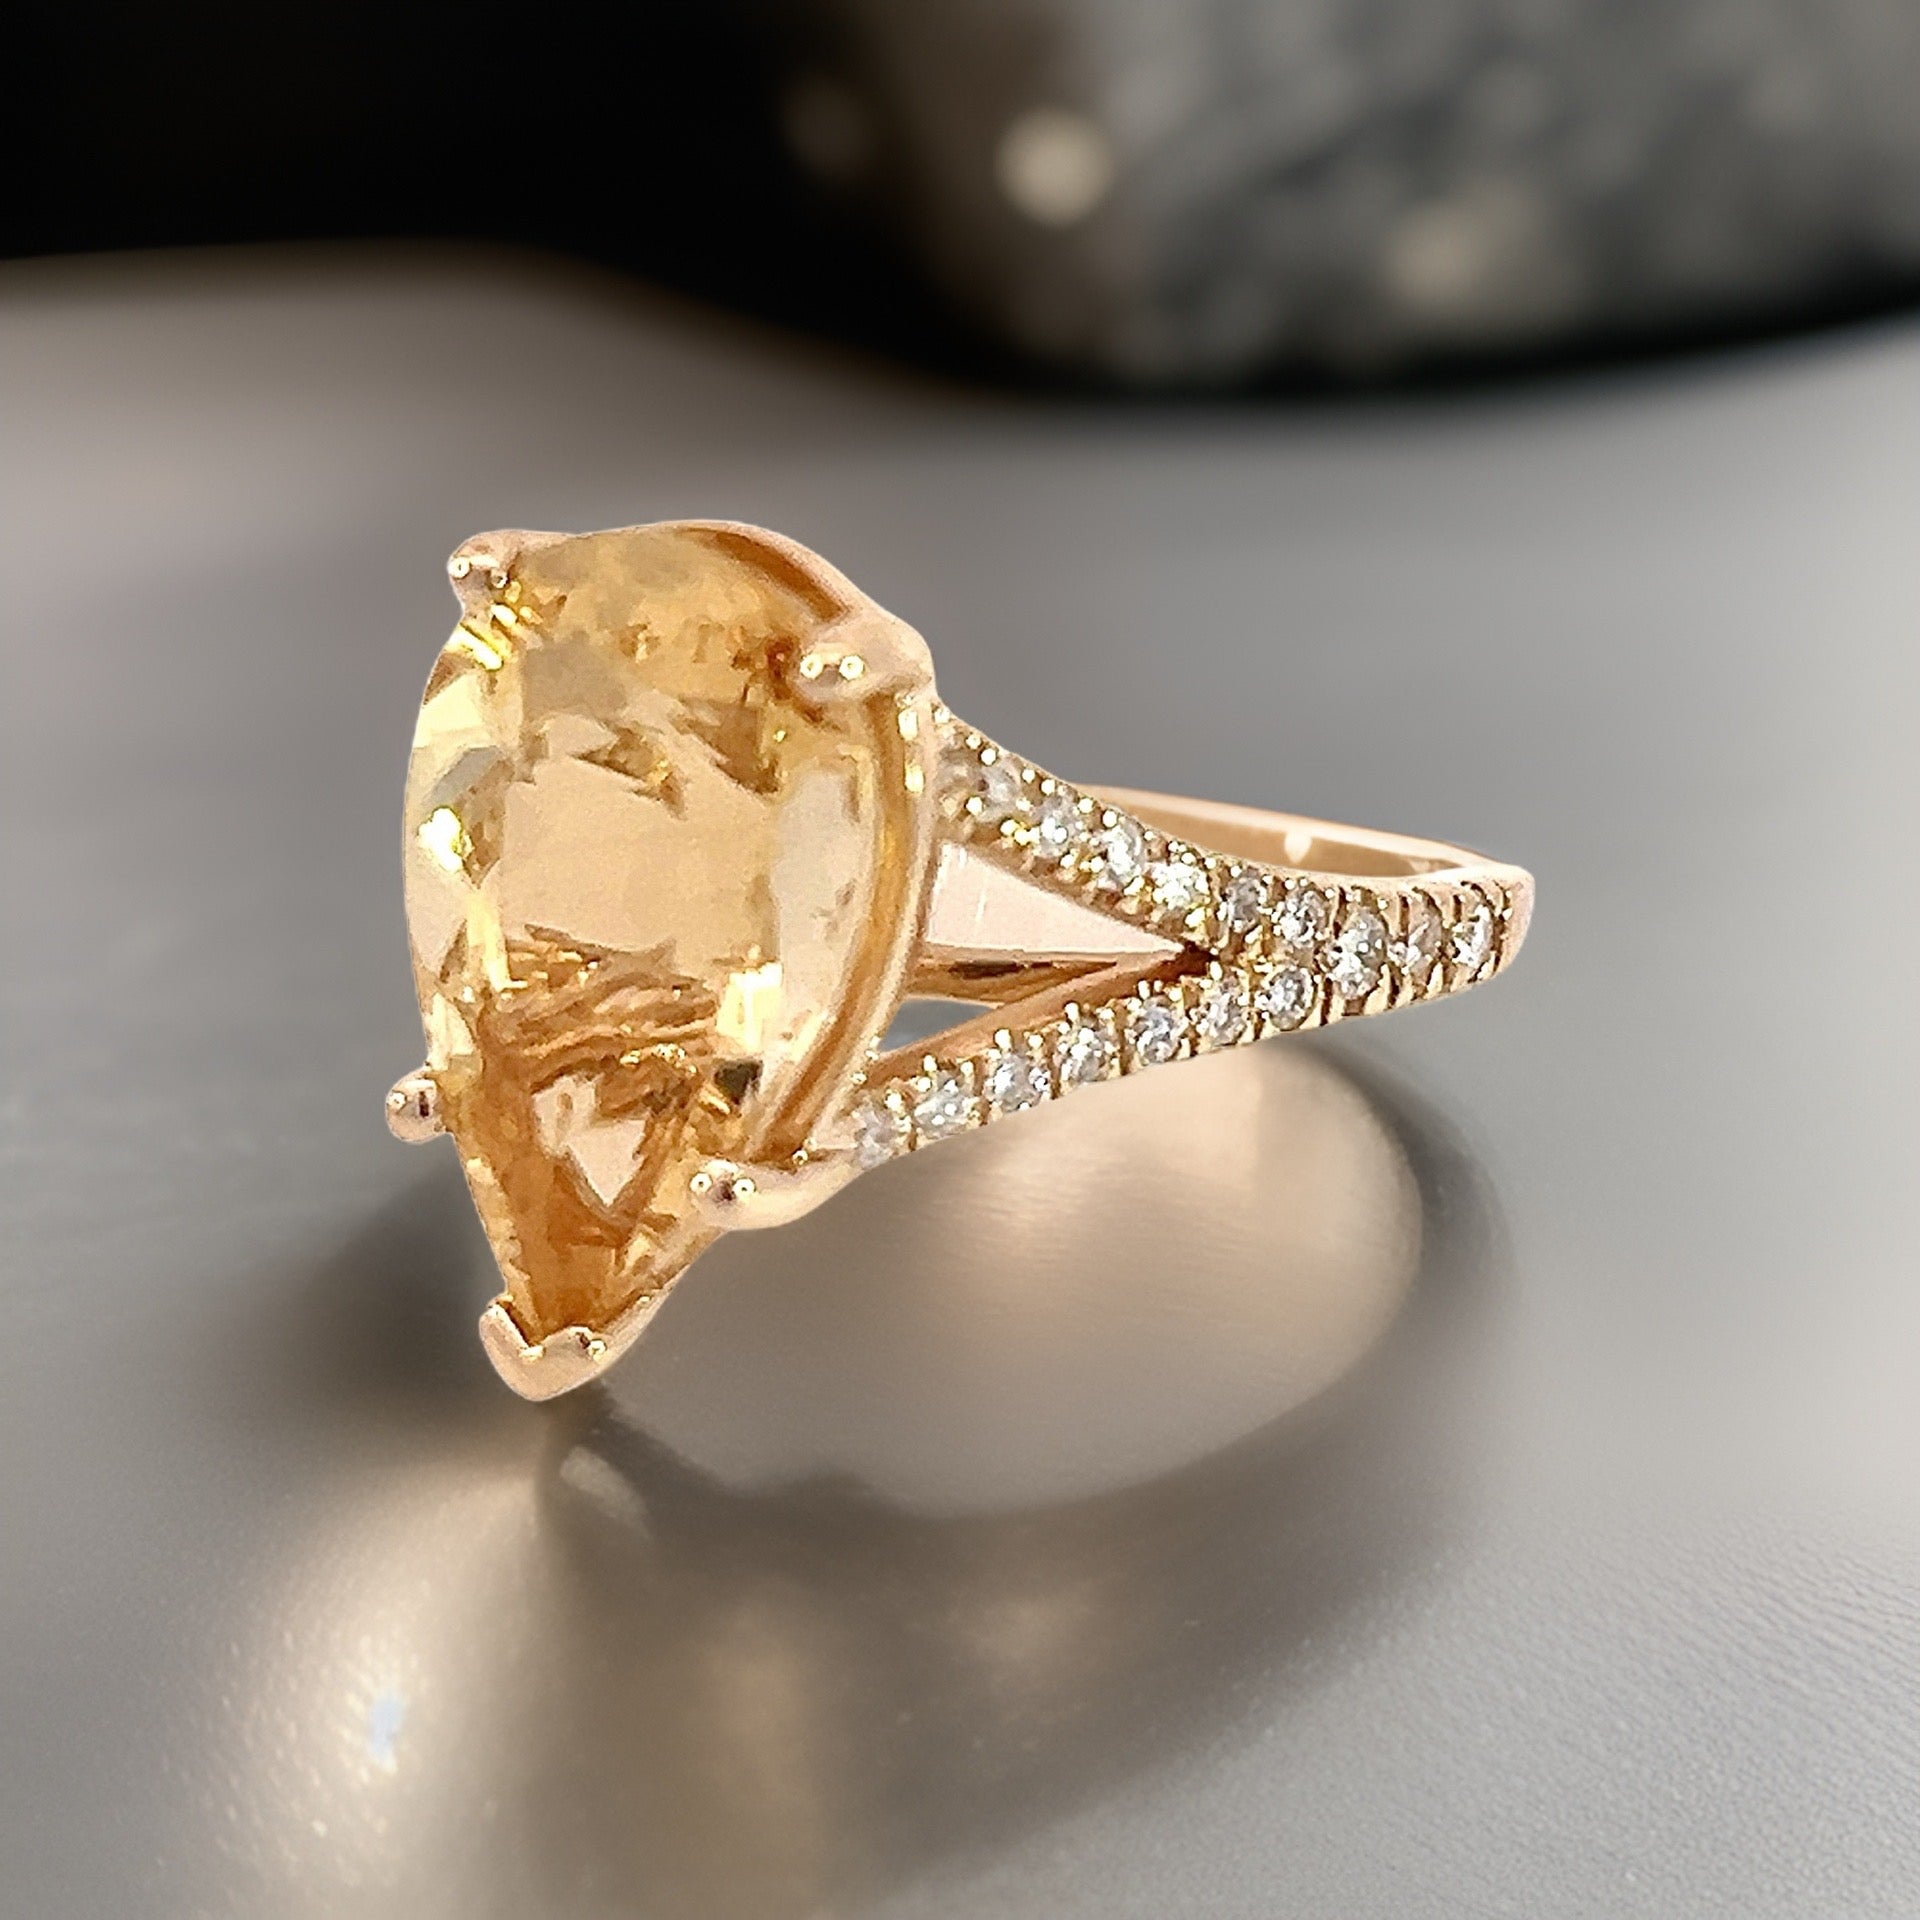 Natural Citrine Diamond Ring 6.5 14k Y Gold 4.79 TCW Certified $3,950 310632